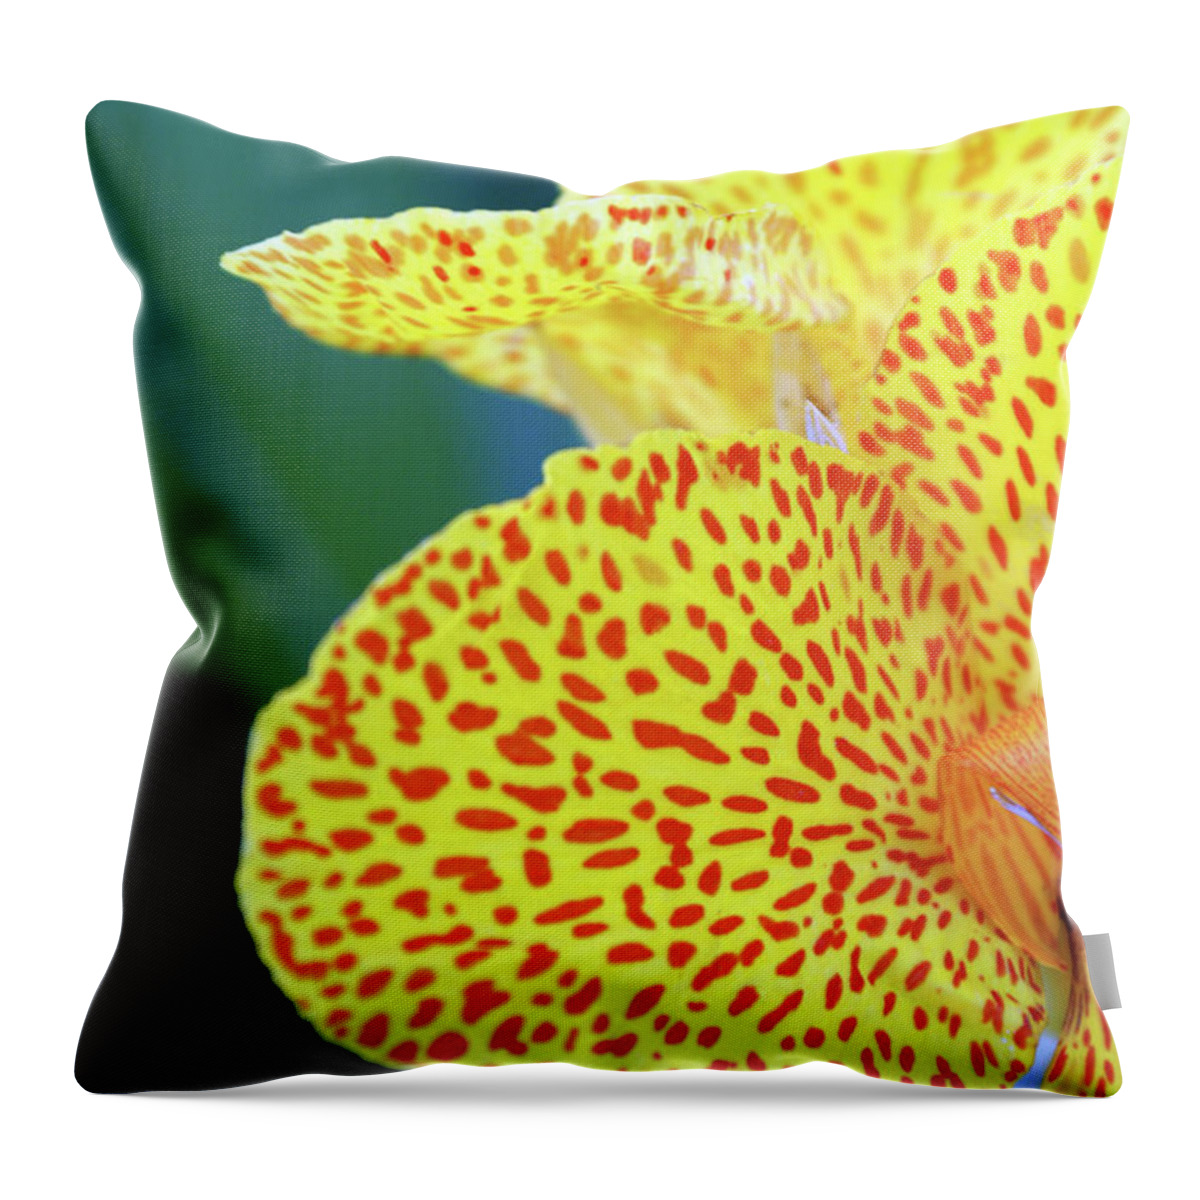 Petal Throw Pillow featuring the photograph Close Up Of Yellow Flower by Sofia Uslenghi